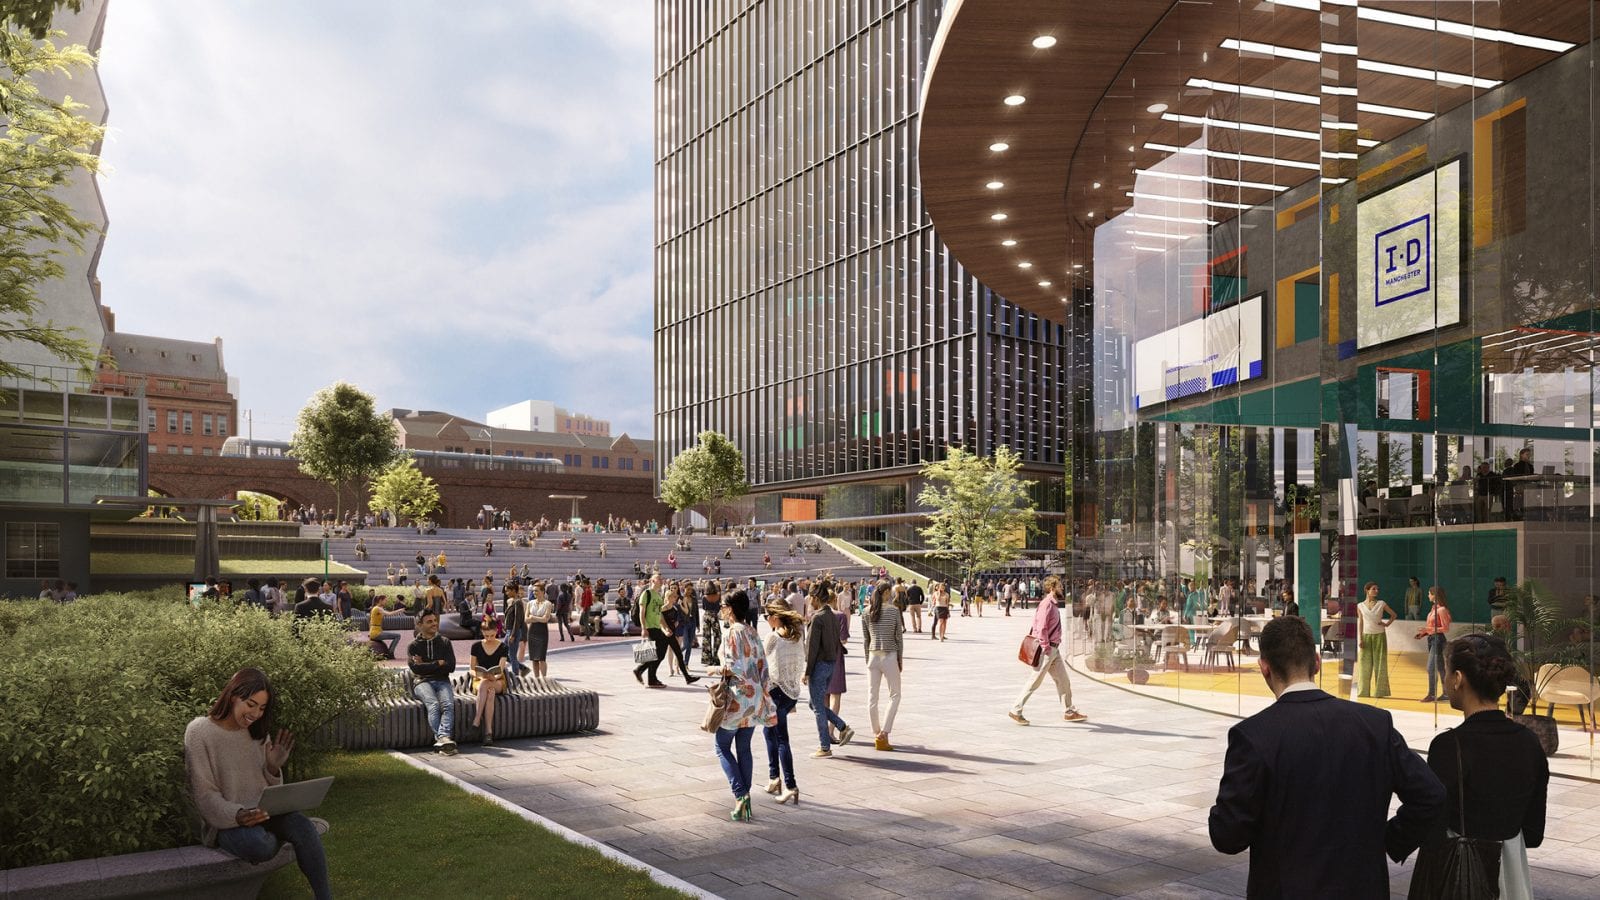 The £1.5bn district spanning 4 million square feet coming to Manchester, The Manc